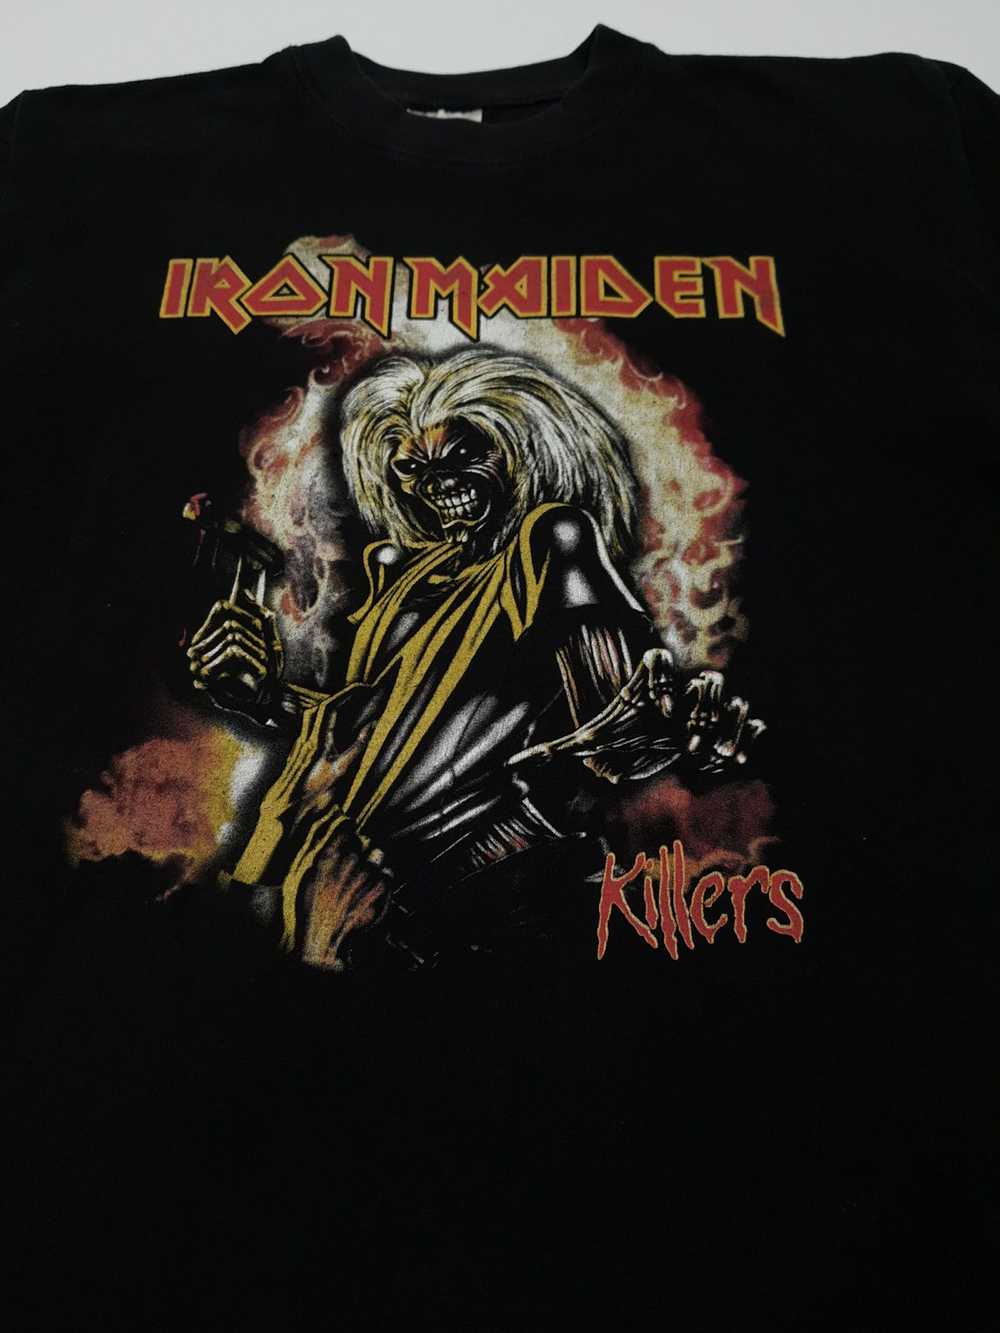 Vintage 1990s Iron Maiden Black Band T-shirt, Metal Collection